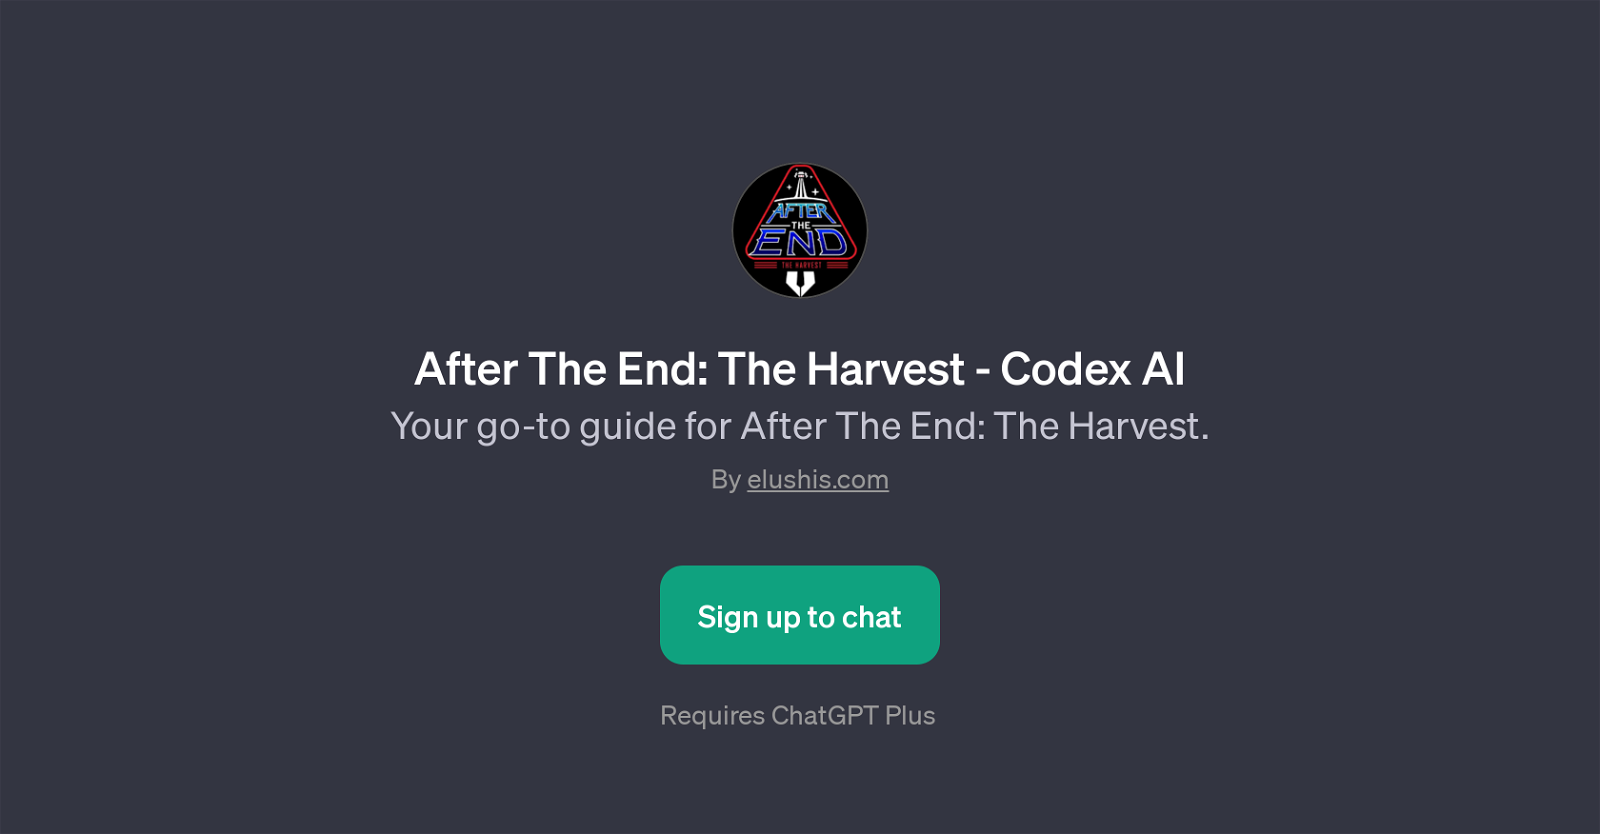 After The End: The Harvest - Codex AI website